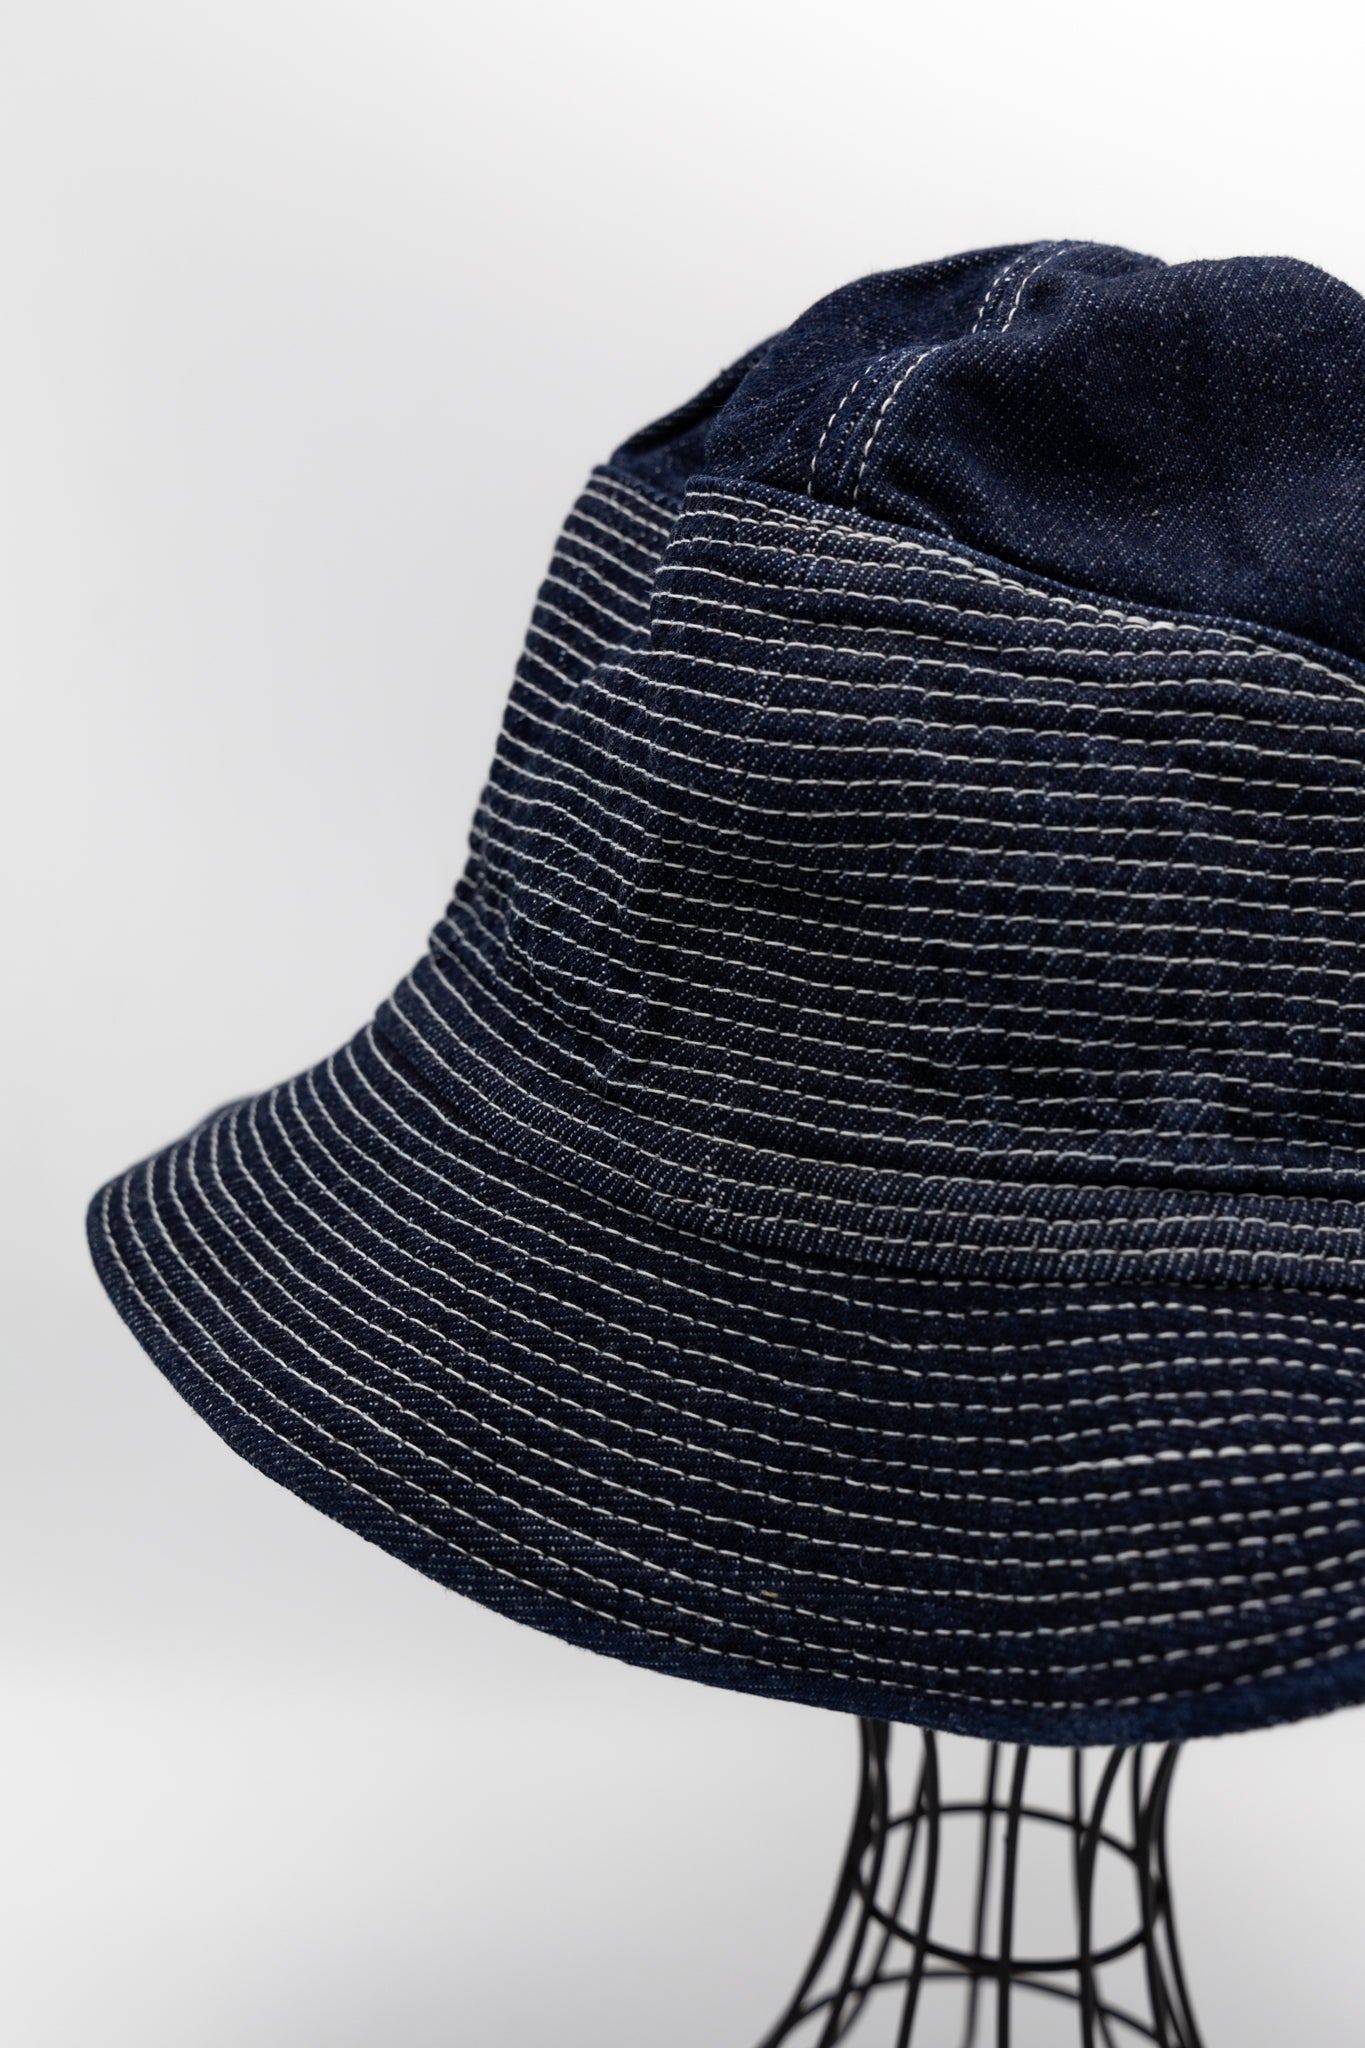 11.5oz Denim THE OLD MAN AND THE SEA Hat